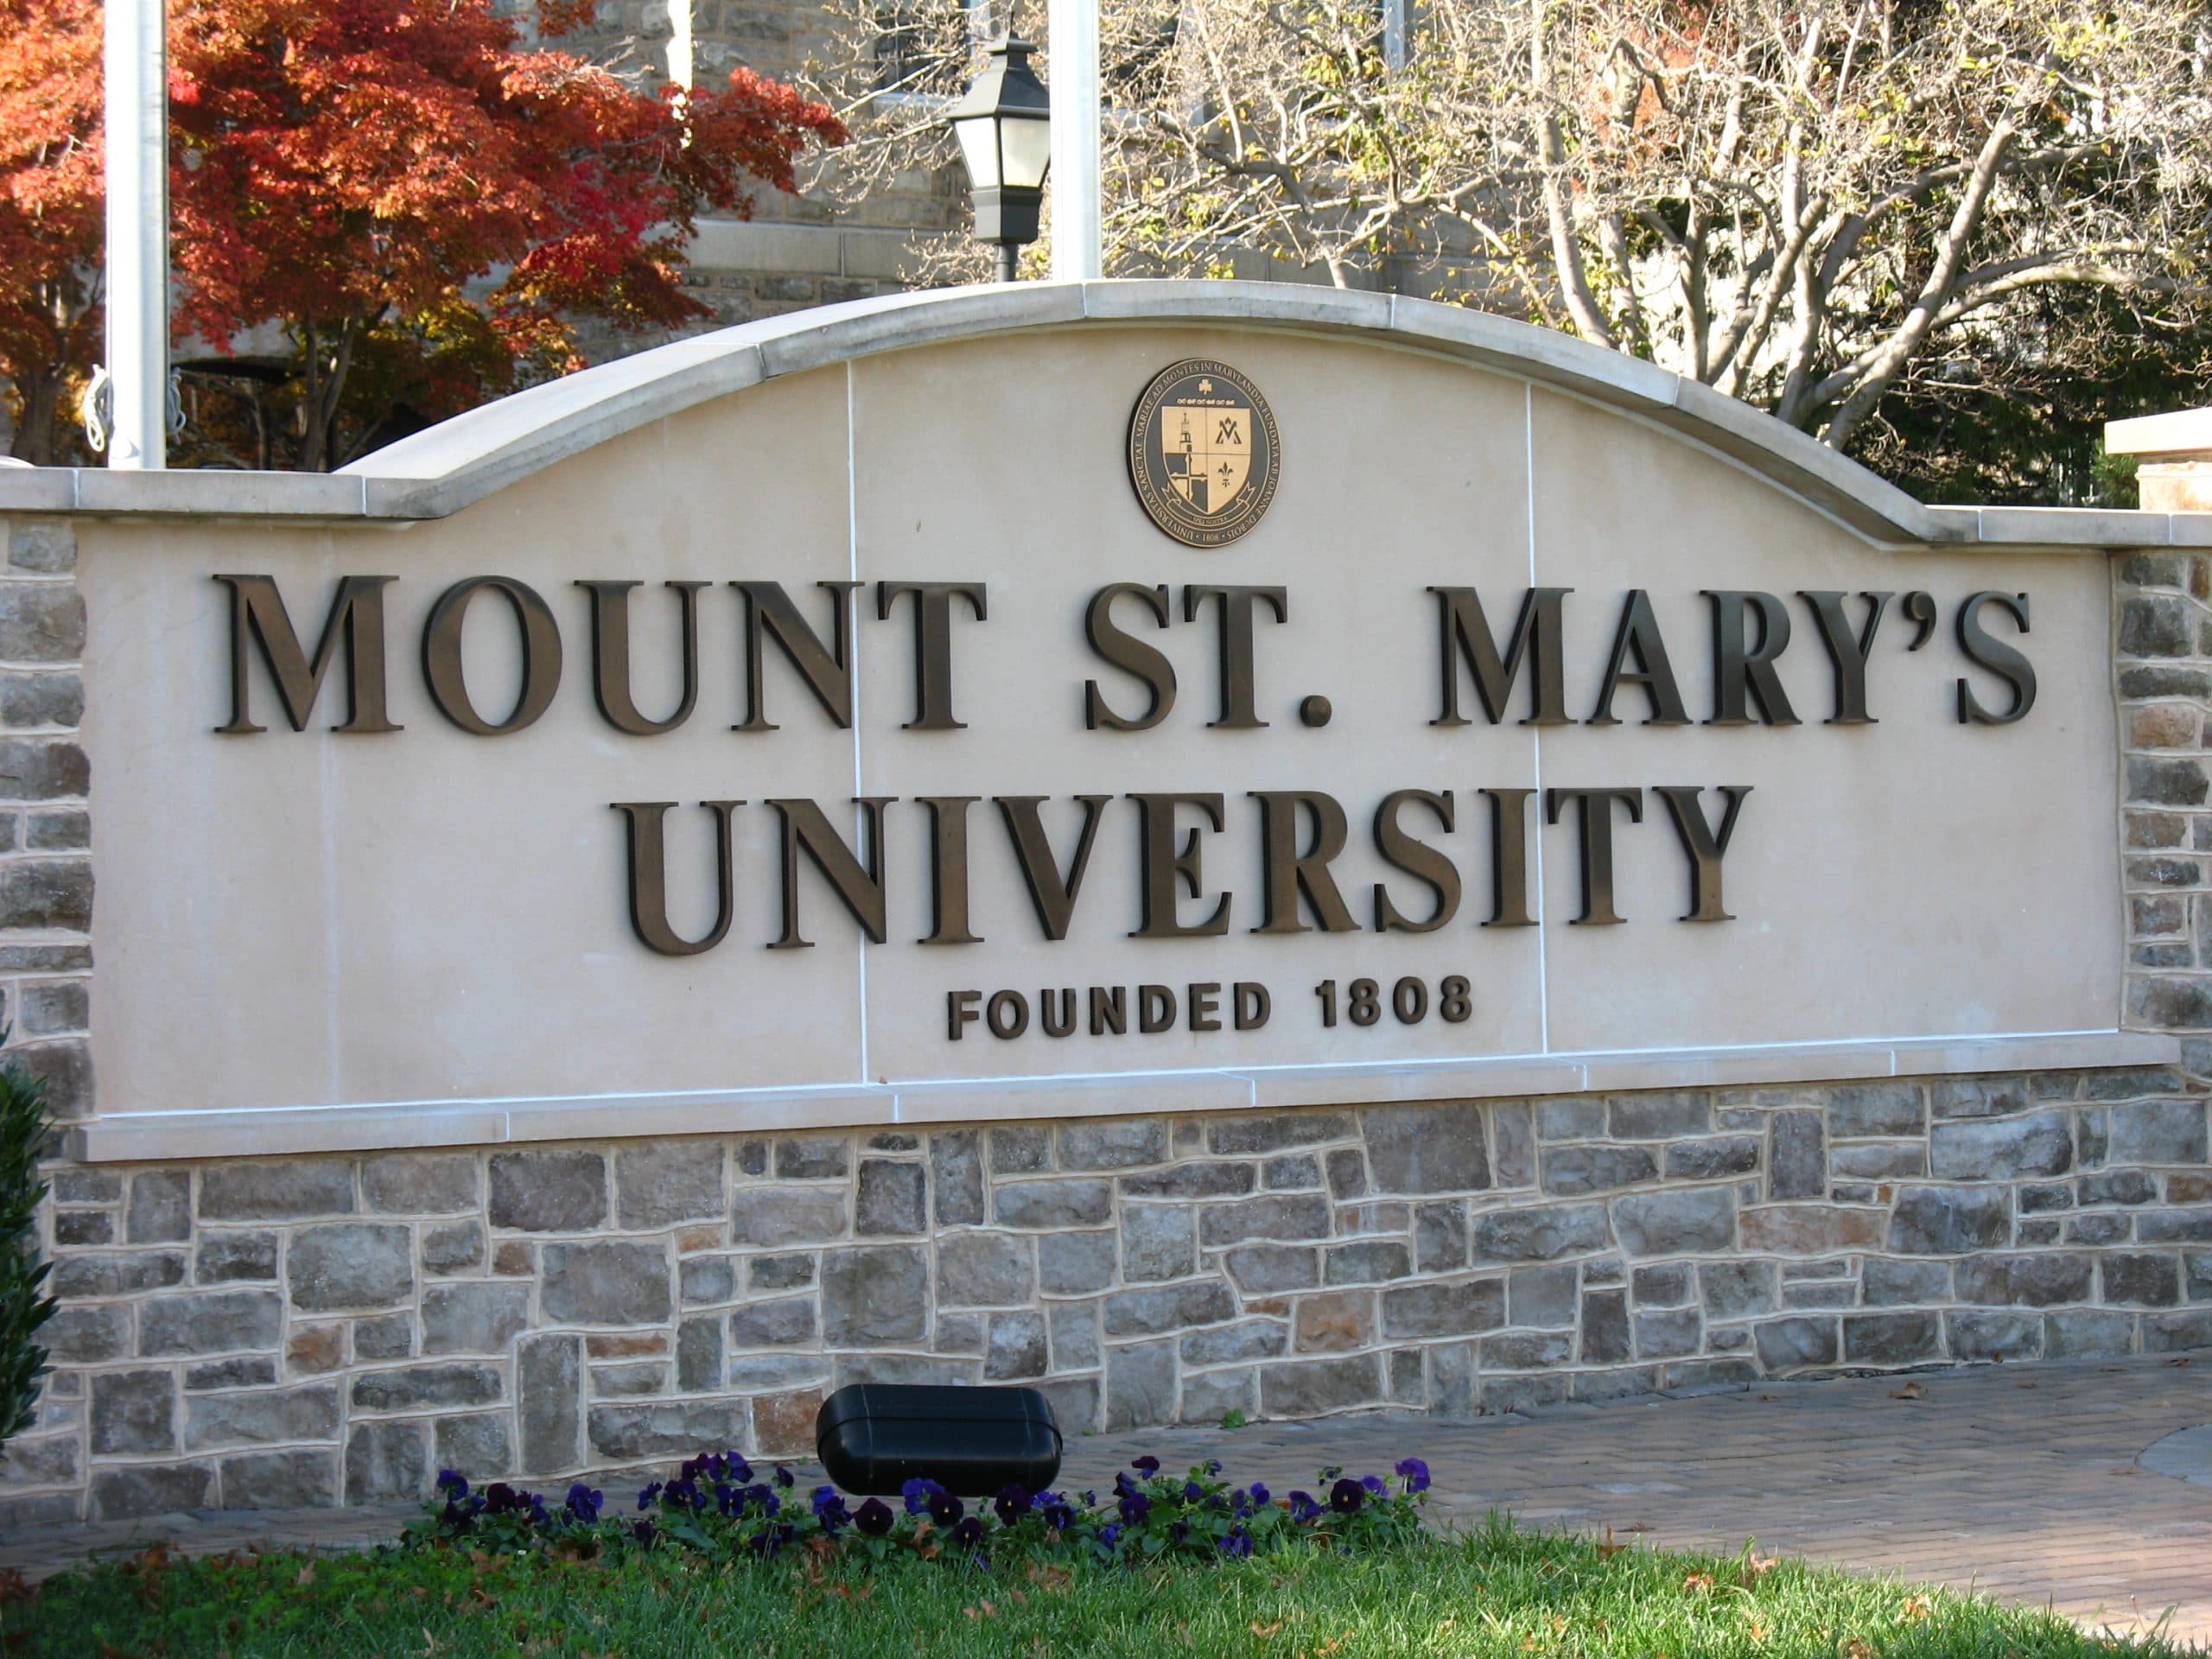 call-for-papers-2018-spring-meeting-at-mount-st-mary-s-university-emmitsburg-md-american